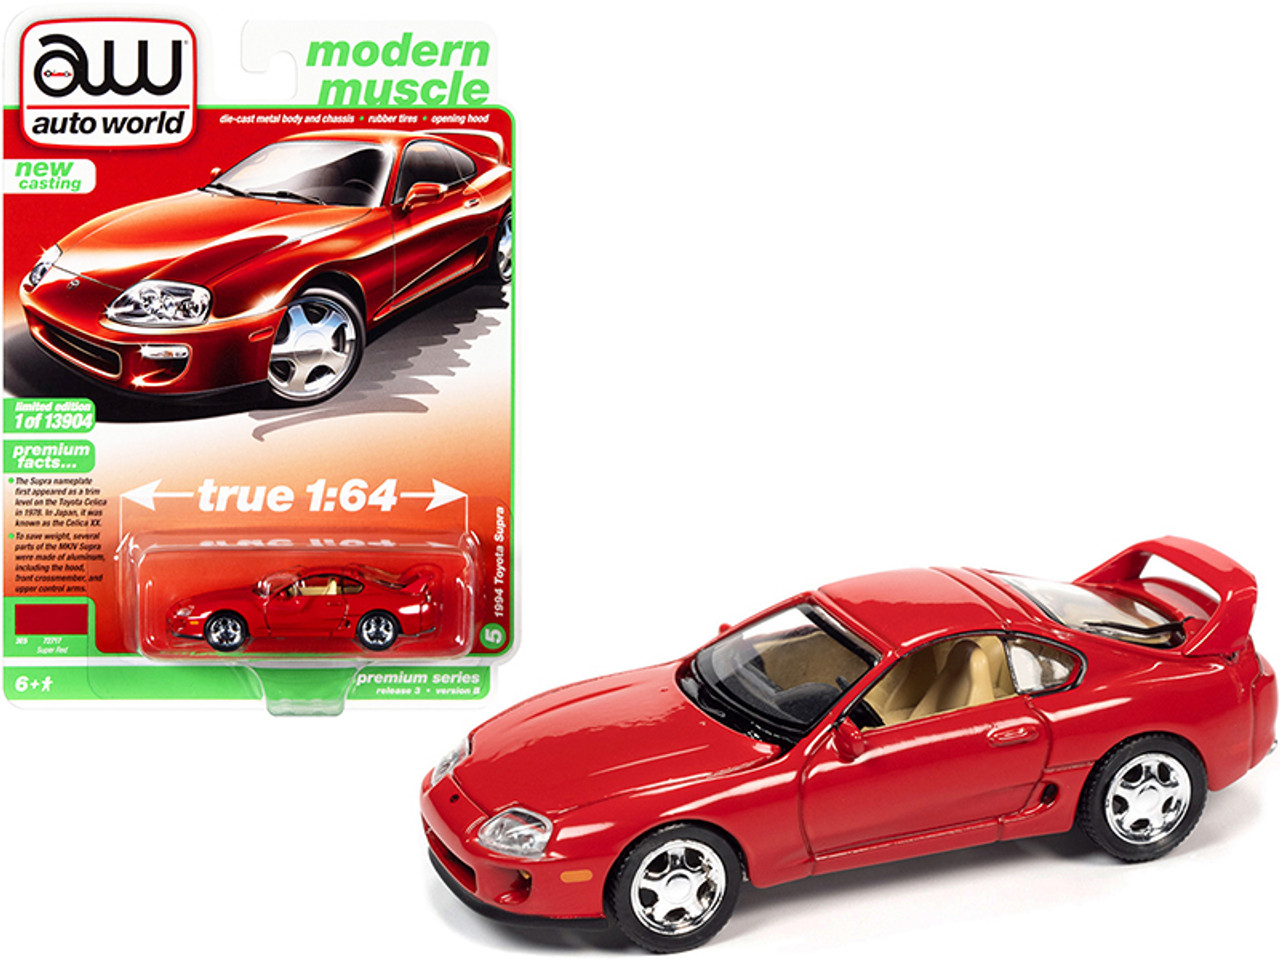 1994 Toyota Supra Super Red "Modern Muscle" Limited Edition to 13904 pieces Worldwide 1/64 Diecast Model Car by Autoworld